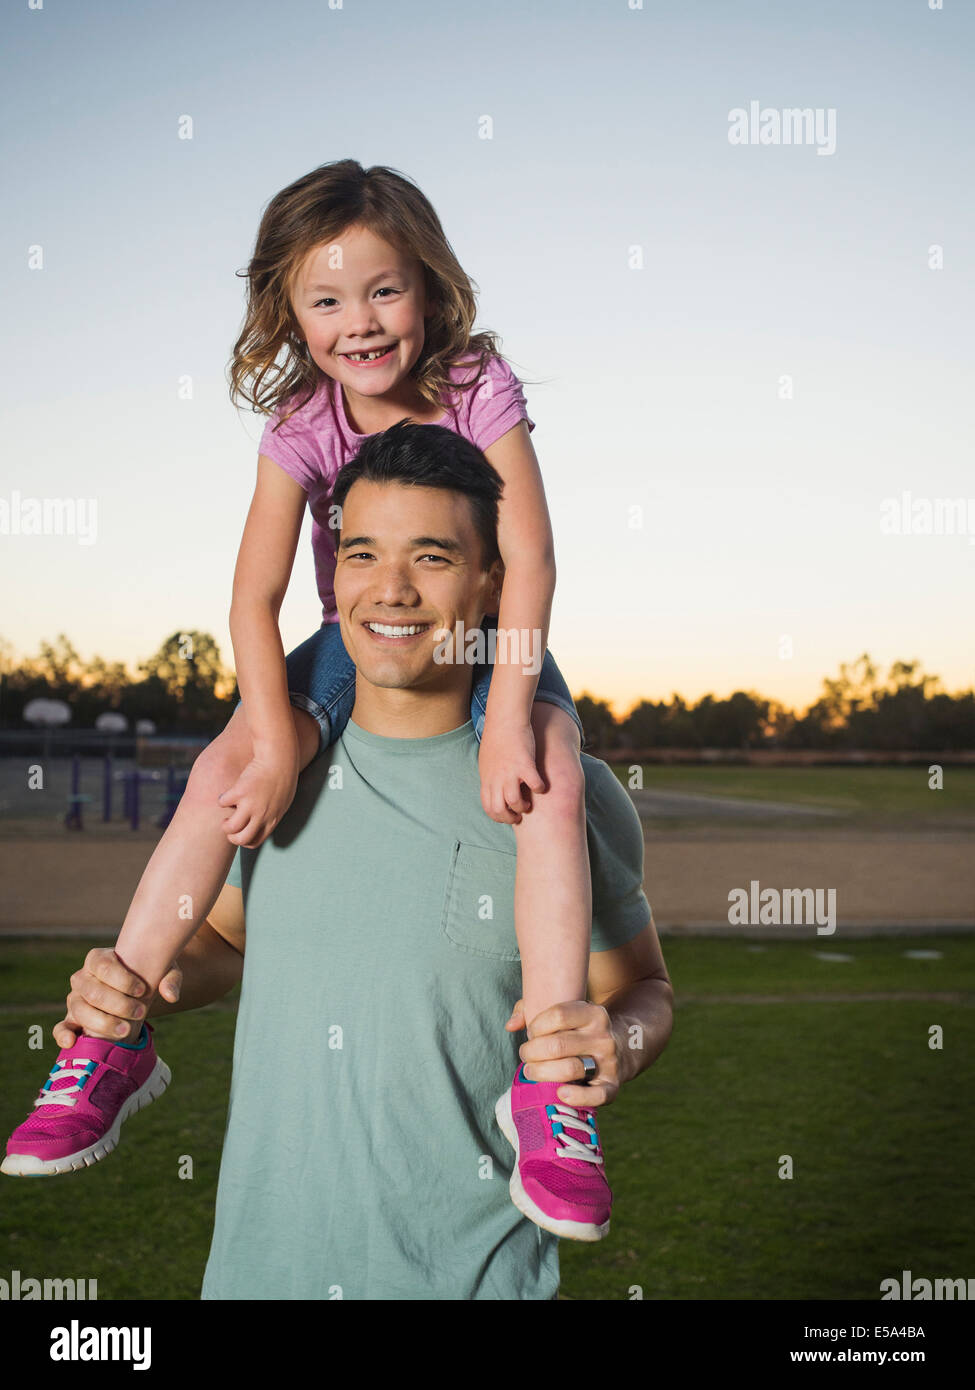 Father carrying daughter on shoulders in park Banque D'Images